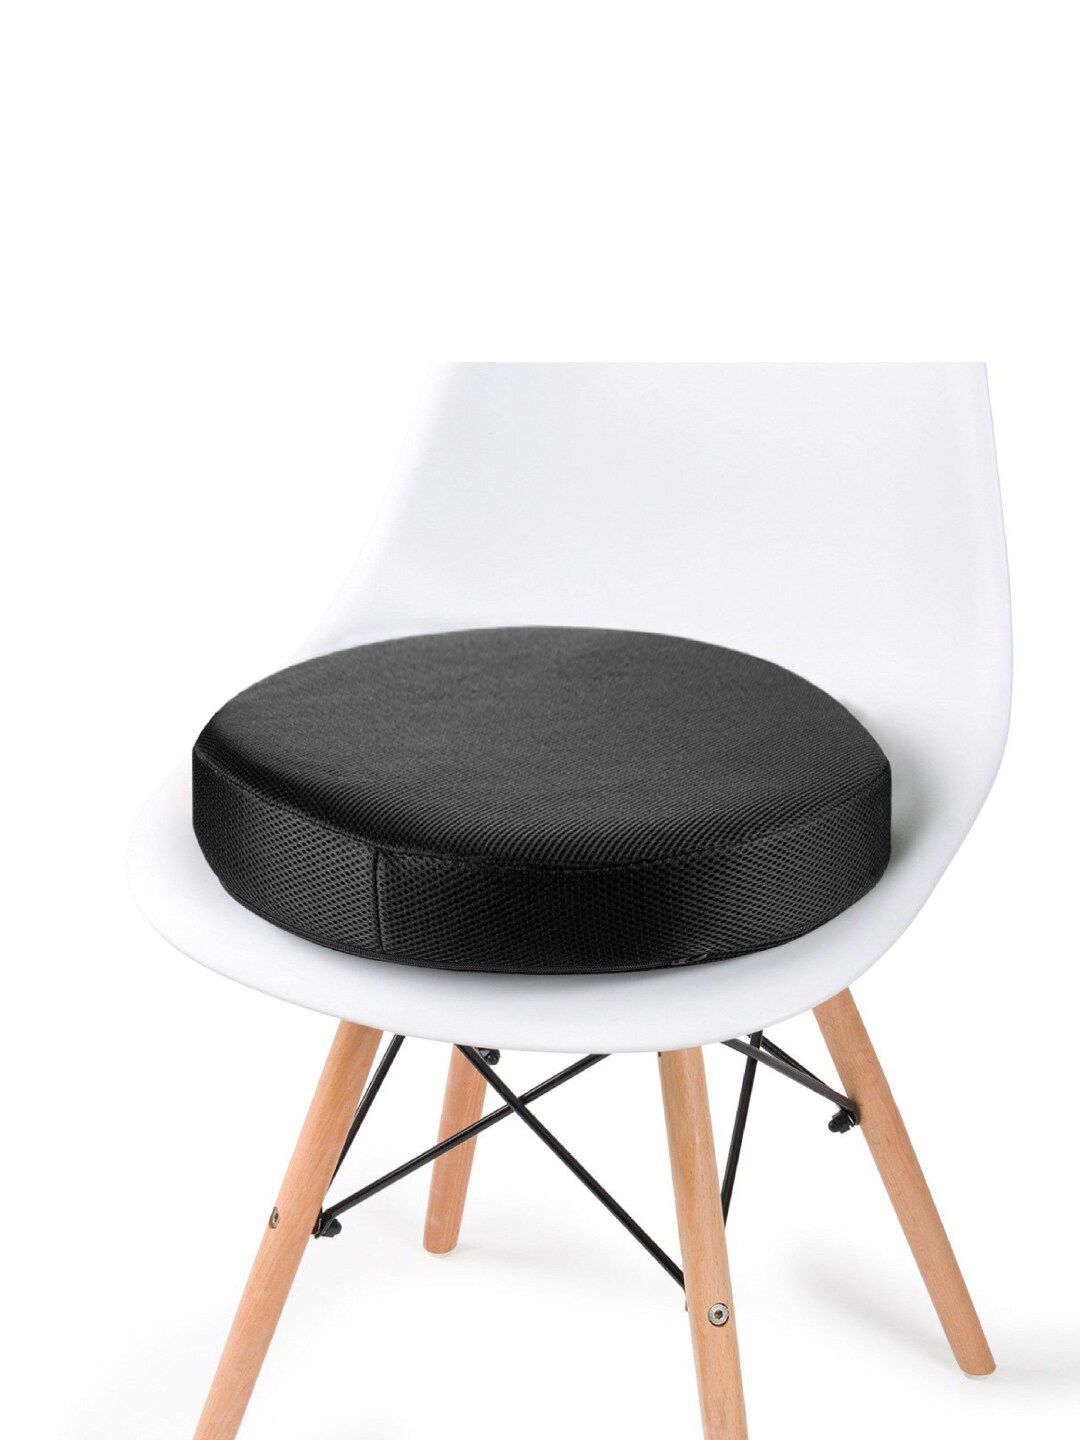 The White Willow Black Indoor Chair Round Seat Cushion Price in India